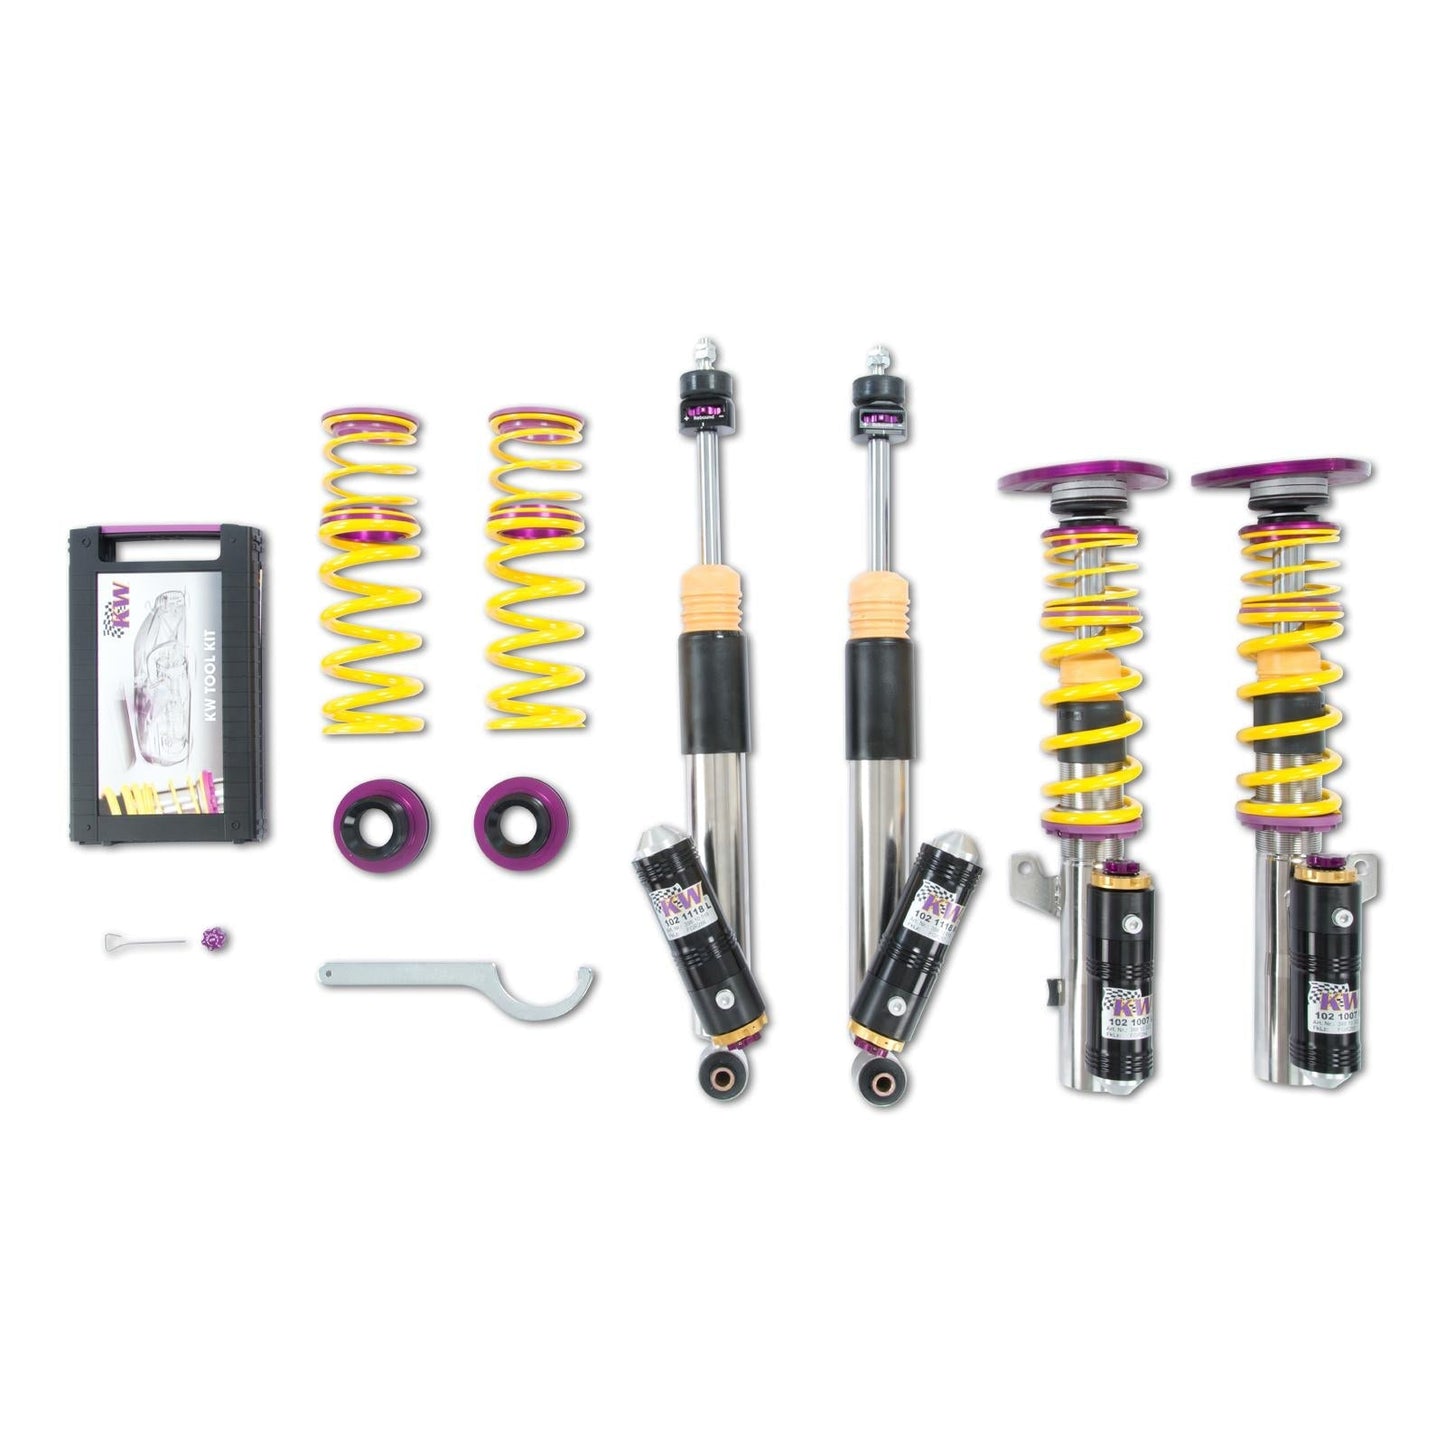 KW Coilover Suspension V4 Clubsport incl. top mounts for BMW E46 M3